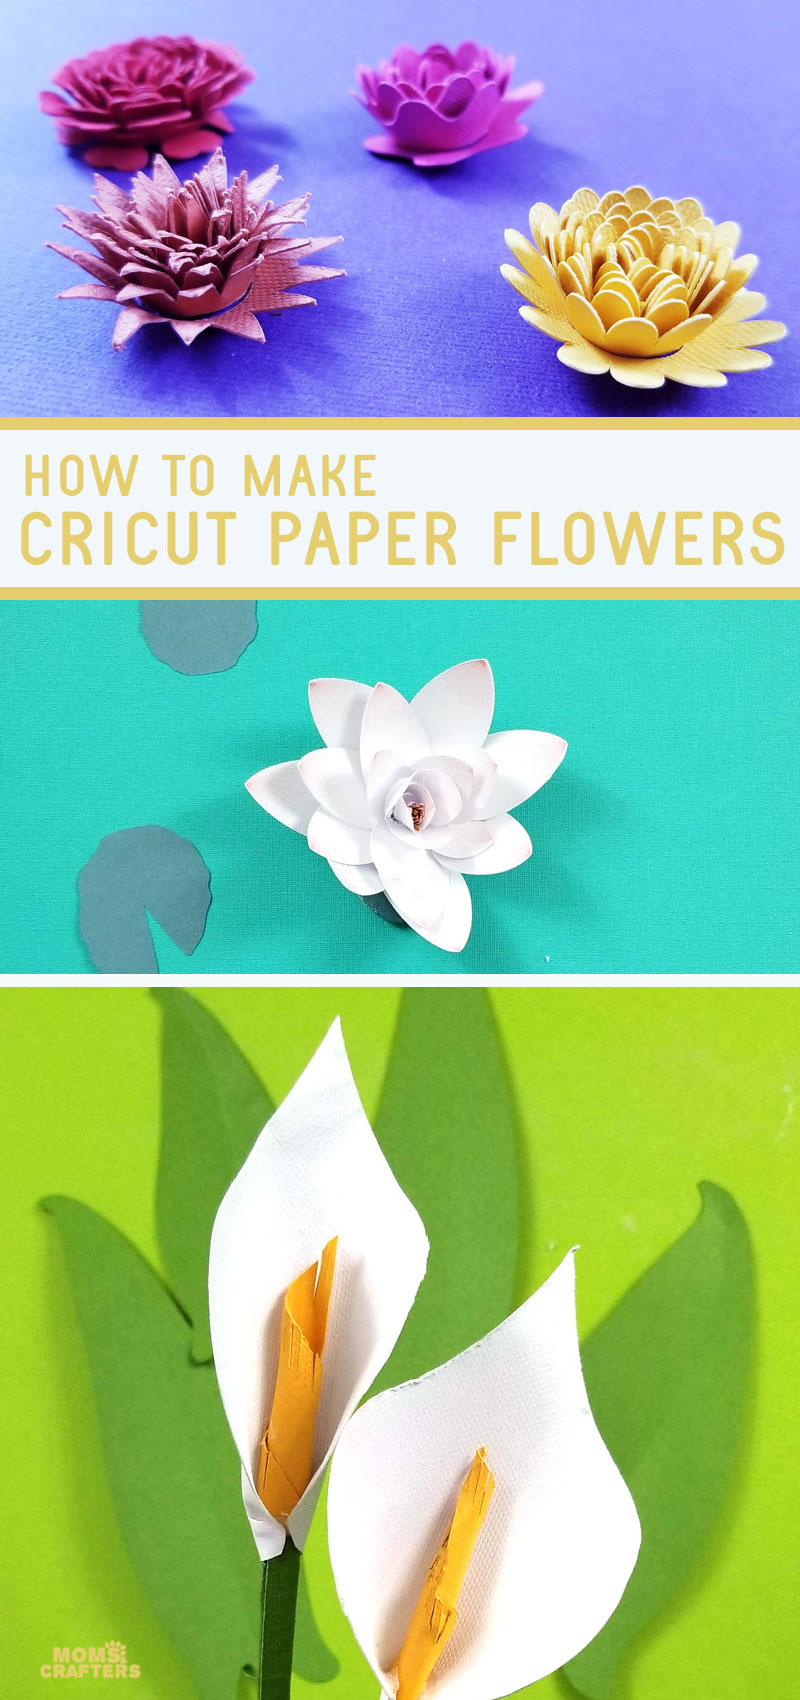 How to make paper flowers with Cricut * Moms and Crafters